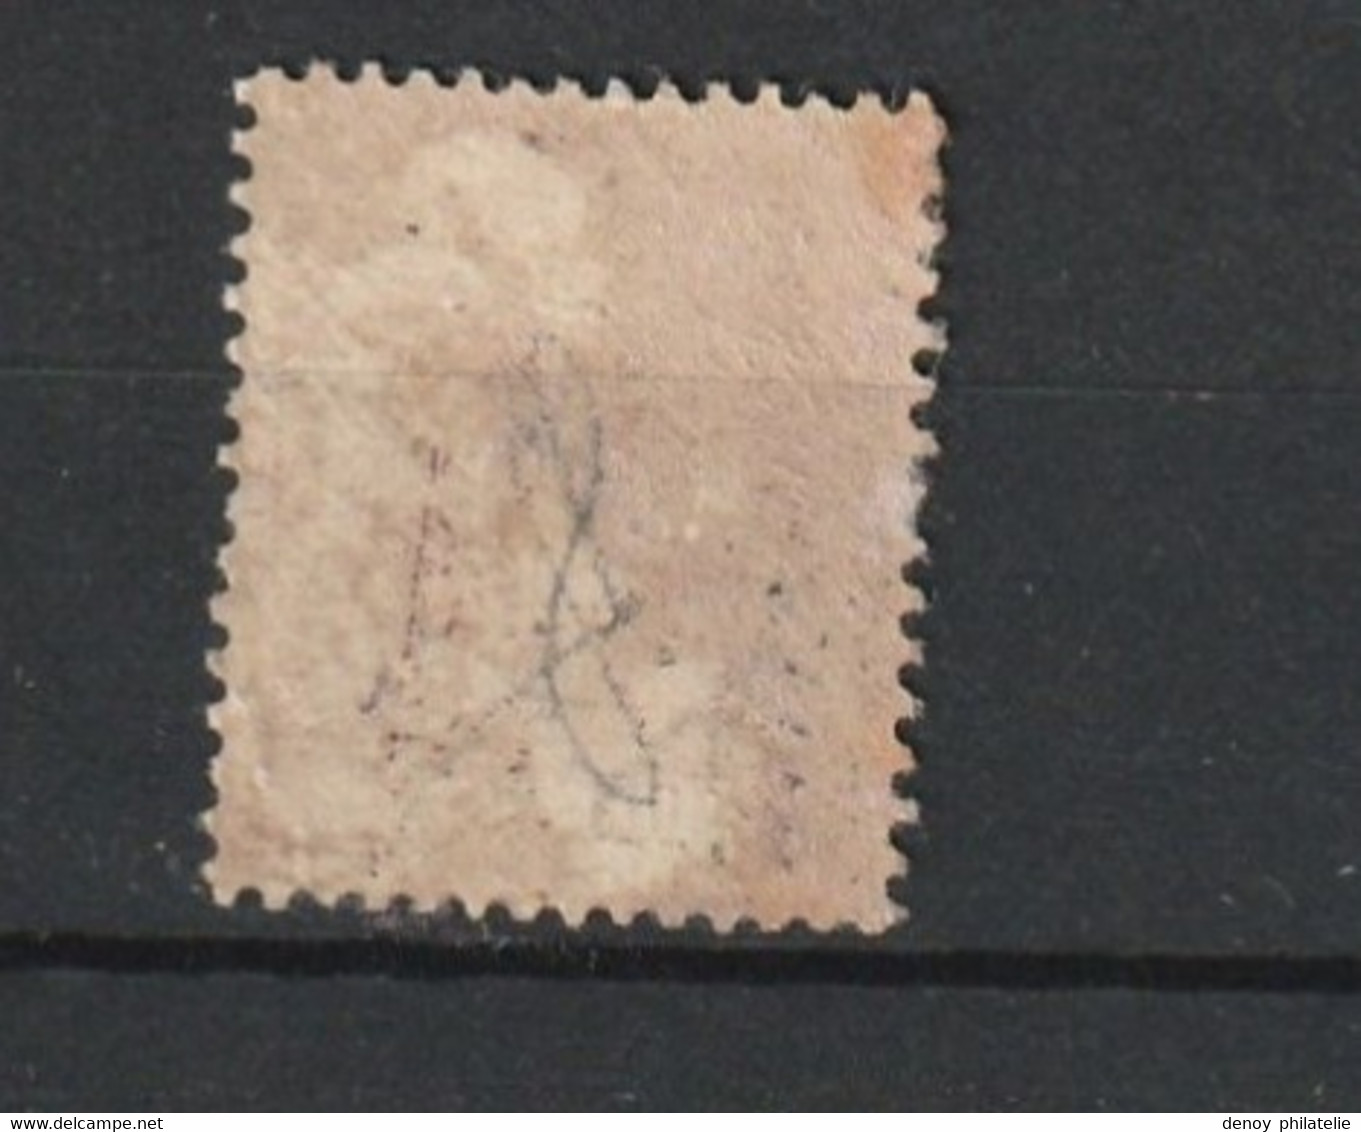 Océanie N° 10 40 Centimes Neuf Charnière Gomme Partielle - Unused Stamps